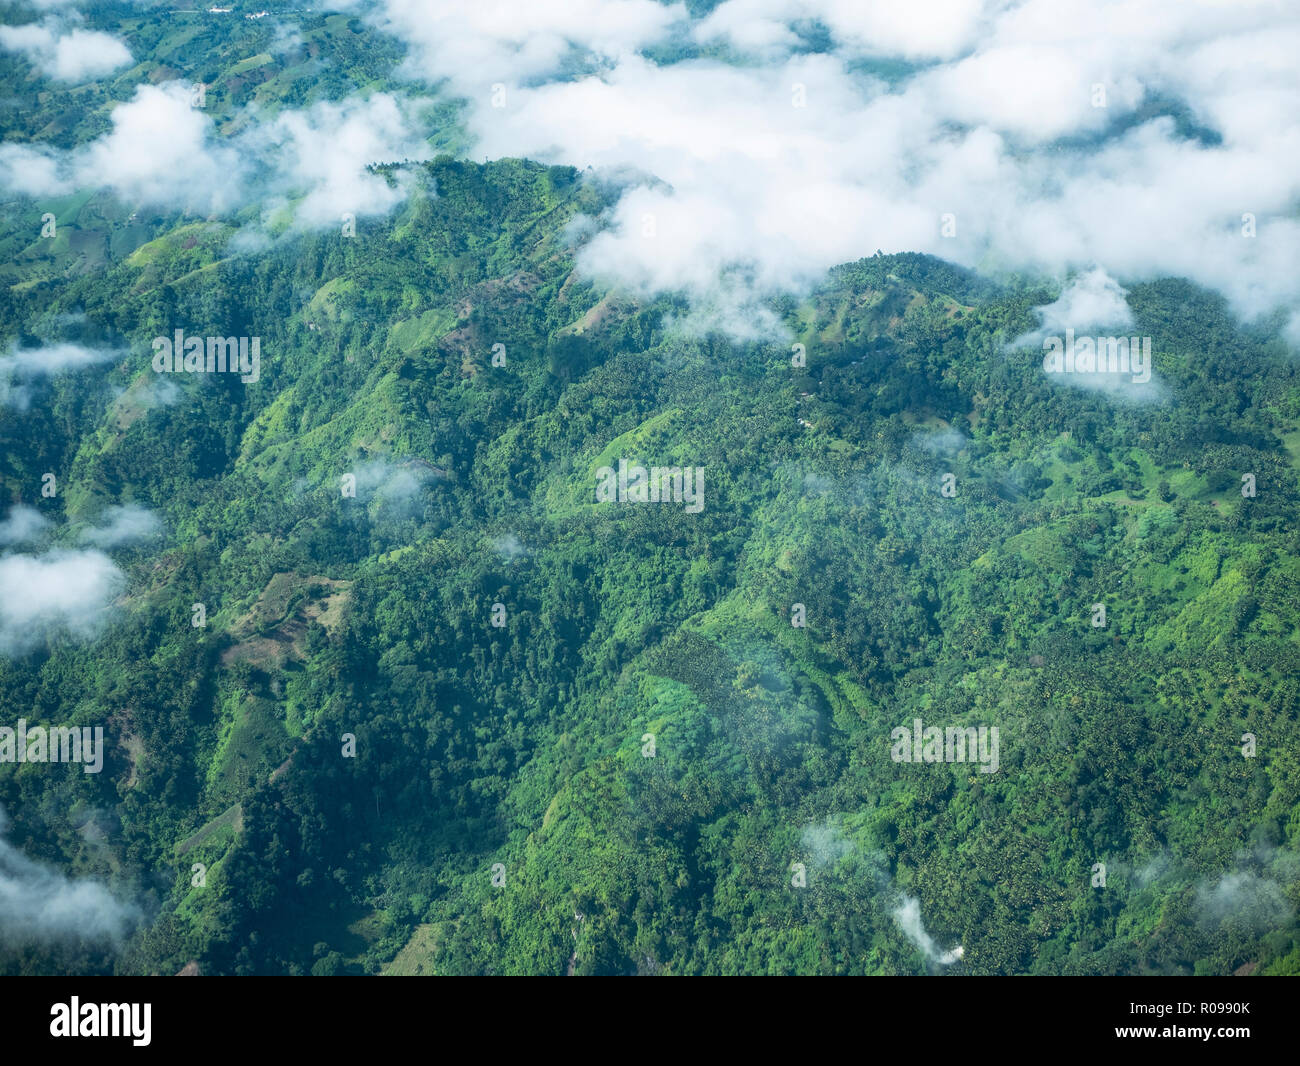 Hilly tropical landscape in the mountains of Mindanao, the southermost major island of the Philippines. Stock Photo